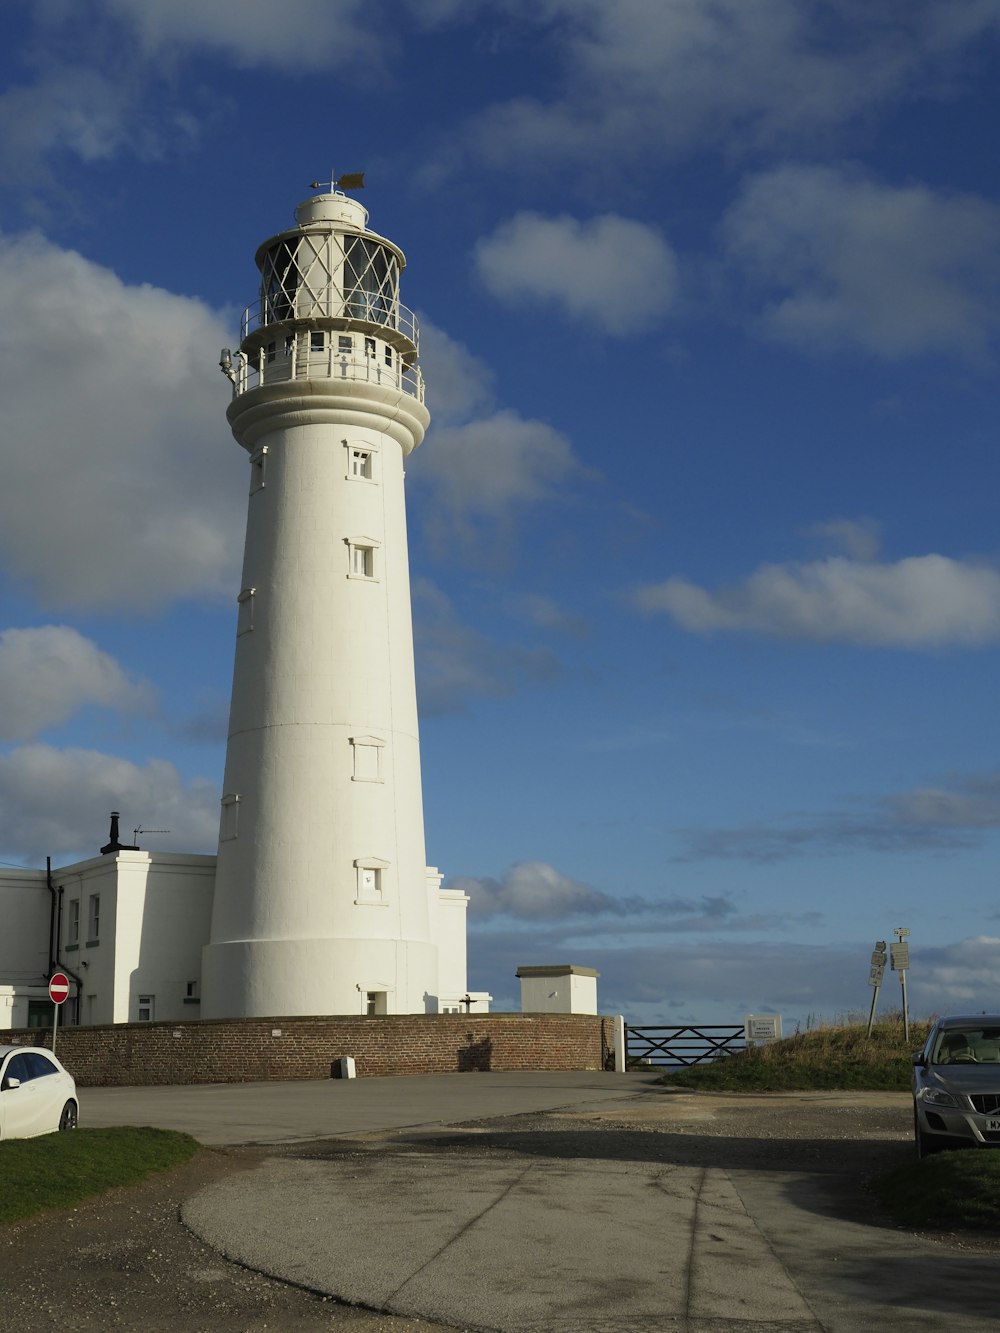 a white car parked in front of a white lighthouse